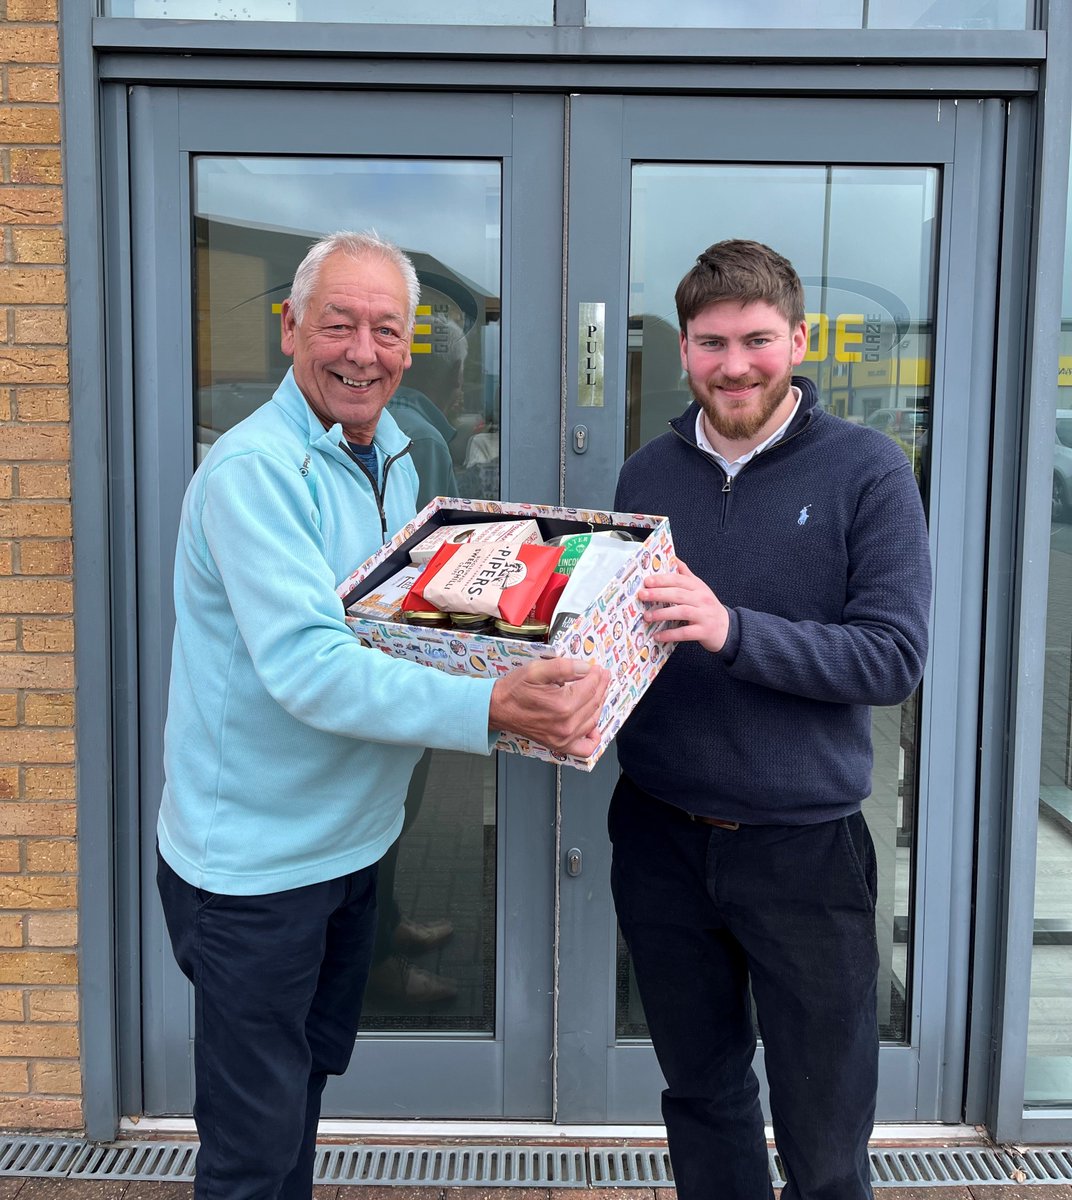 Congrats to our Lincoln AR John Forbes, winner of yesterday's hamper at Build for the Future East Midlands 🎉 Thanks to @tradeglazeltd & @BritishHamper for the amazing prize! 🙌 #BuildForTheFuture #LincolnshireHamper #PrizeDraw